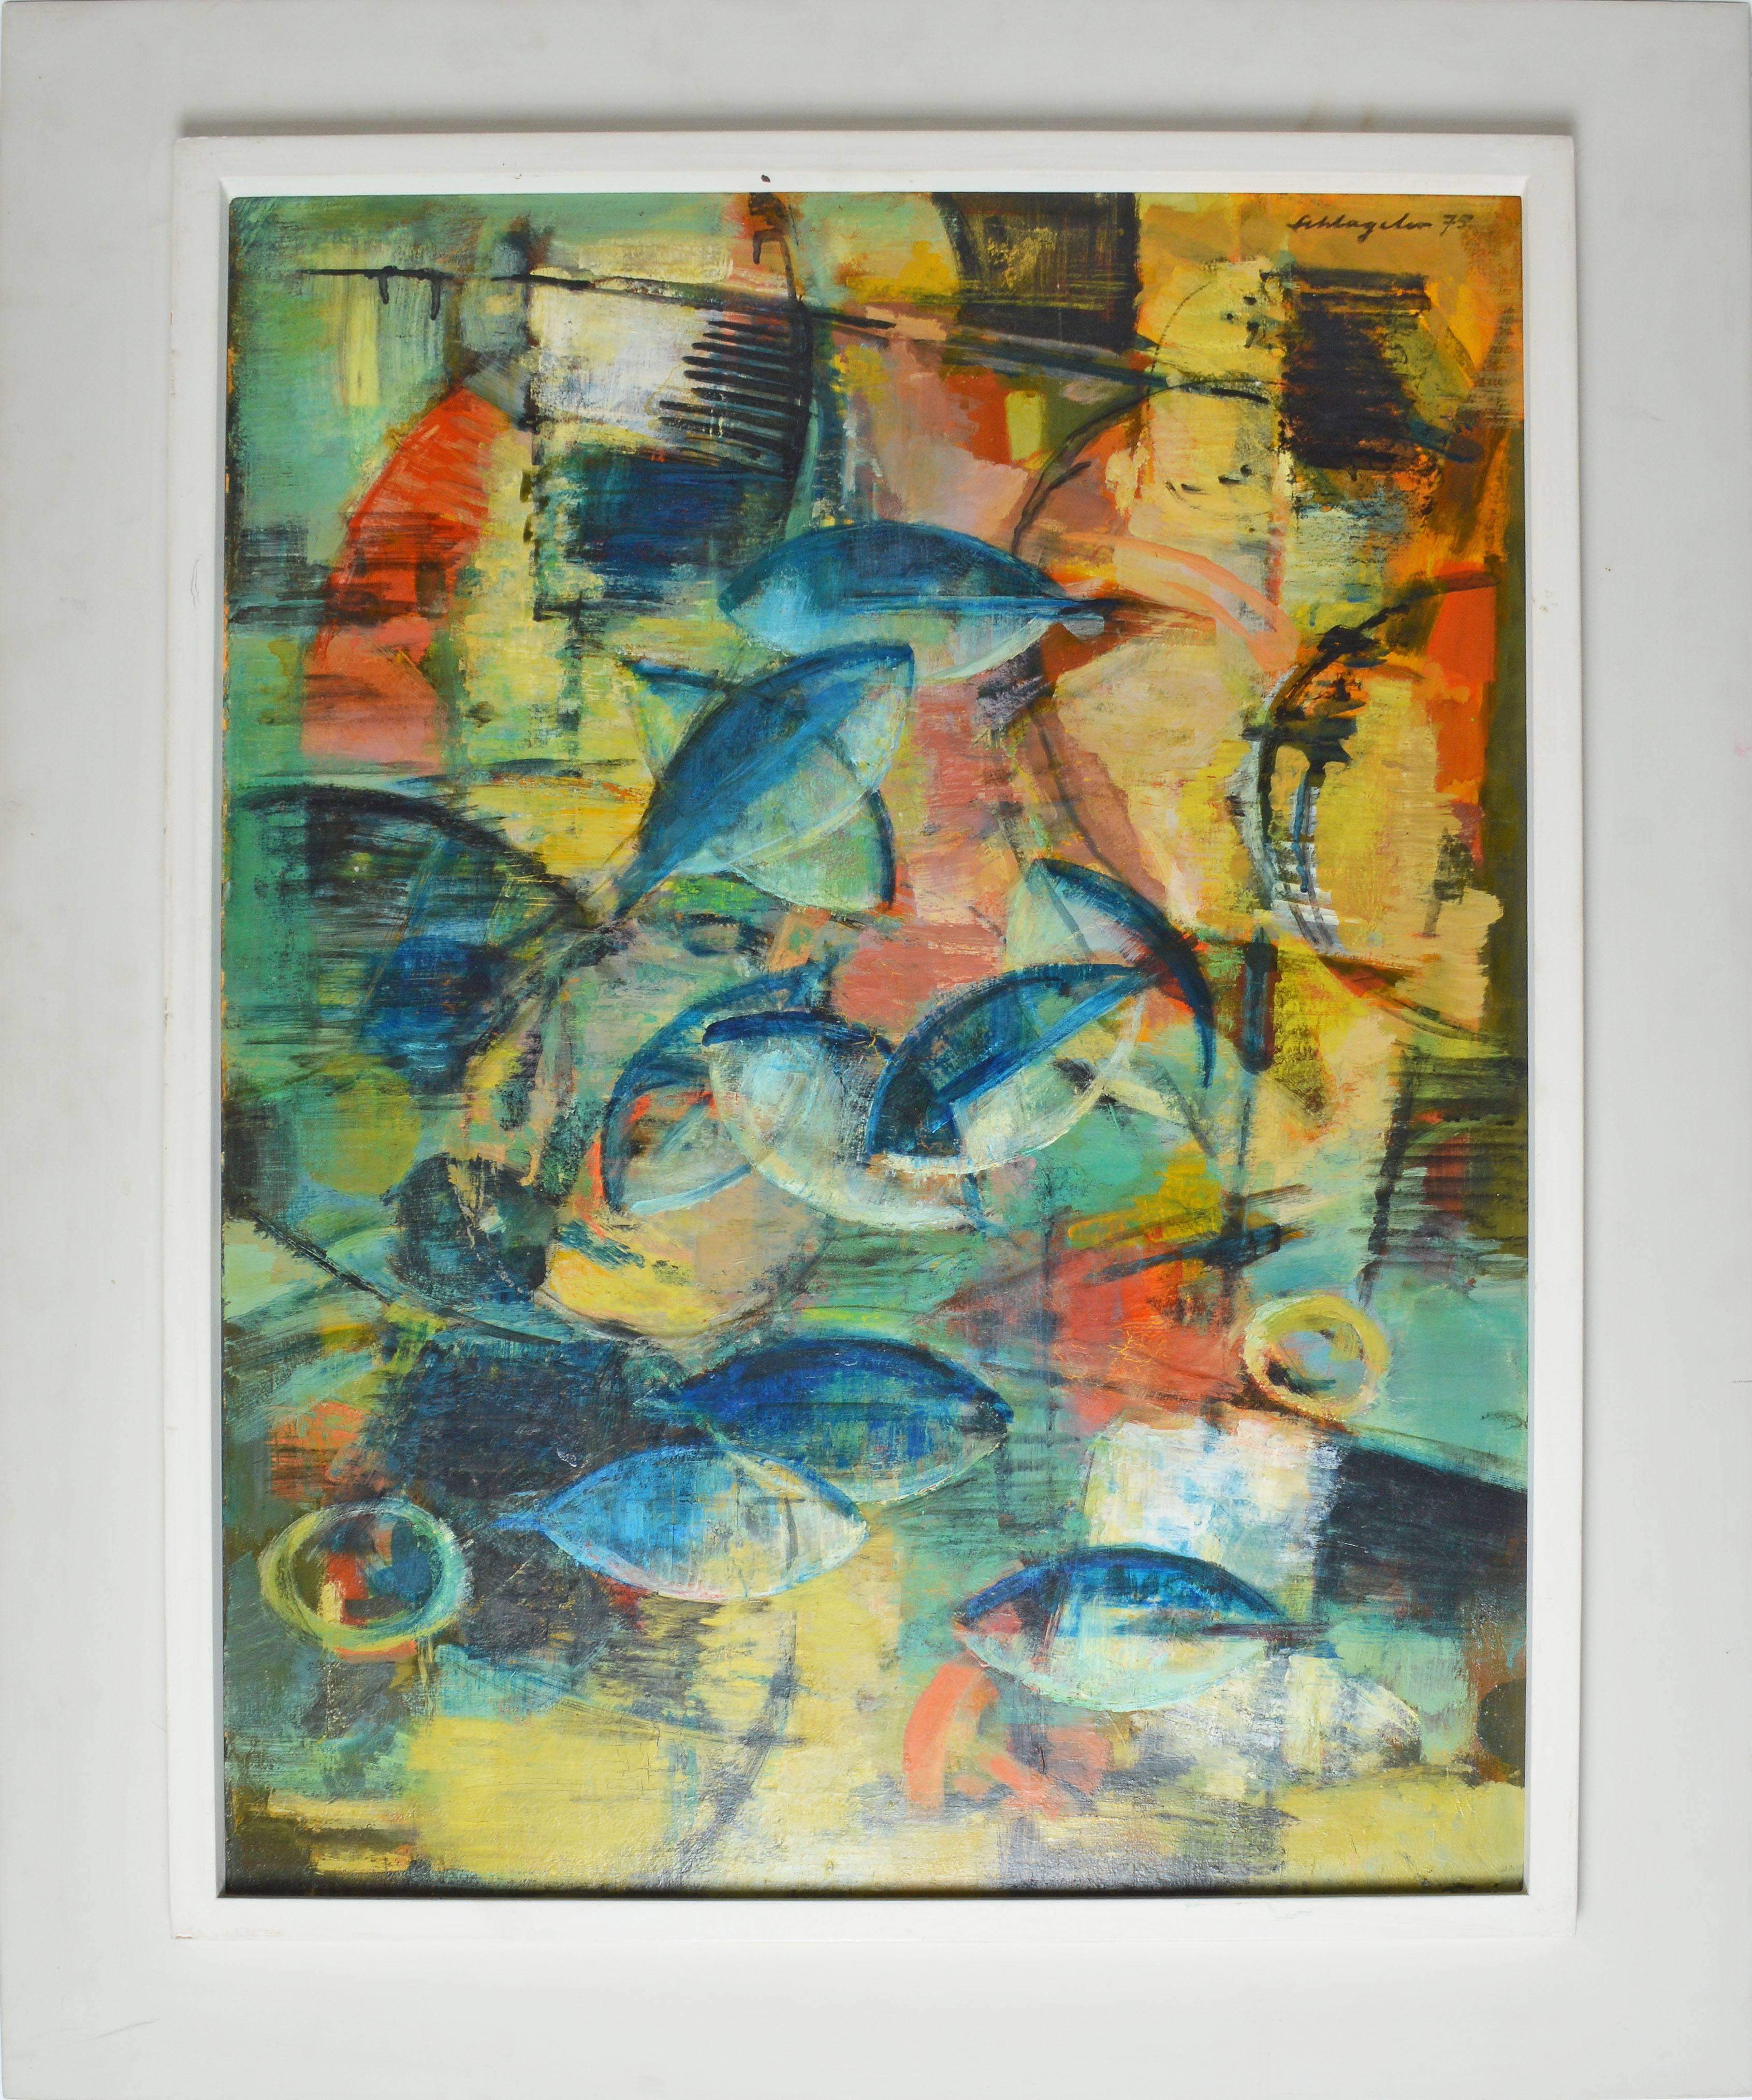 Abstract expressionist composition with fish by Karl Schlageter  (1894 - 1990).  Oil on canvas, circa 1975.  Signed.  Displayed in a white modernist frame.  Image size, 23.5"L x 32.5"H, overall 30"L x 40"H.